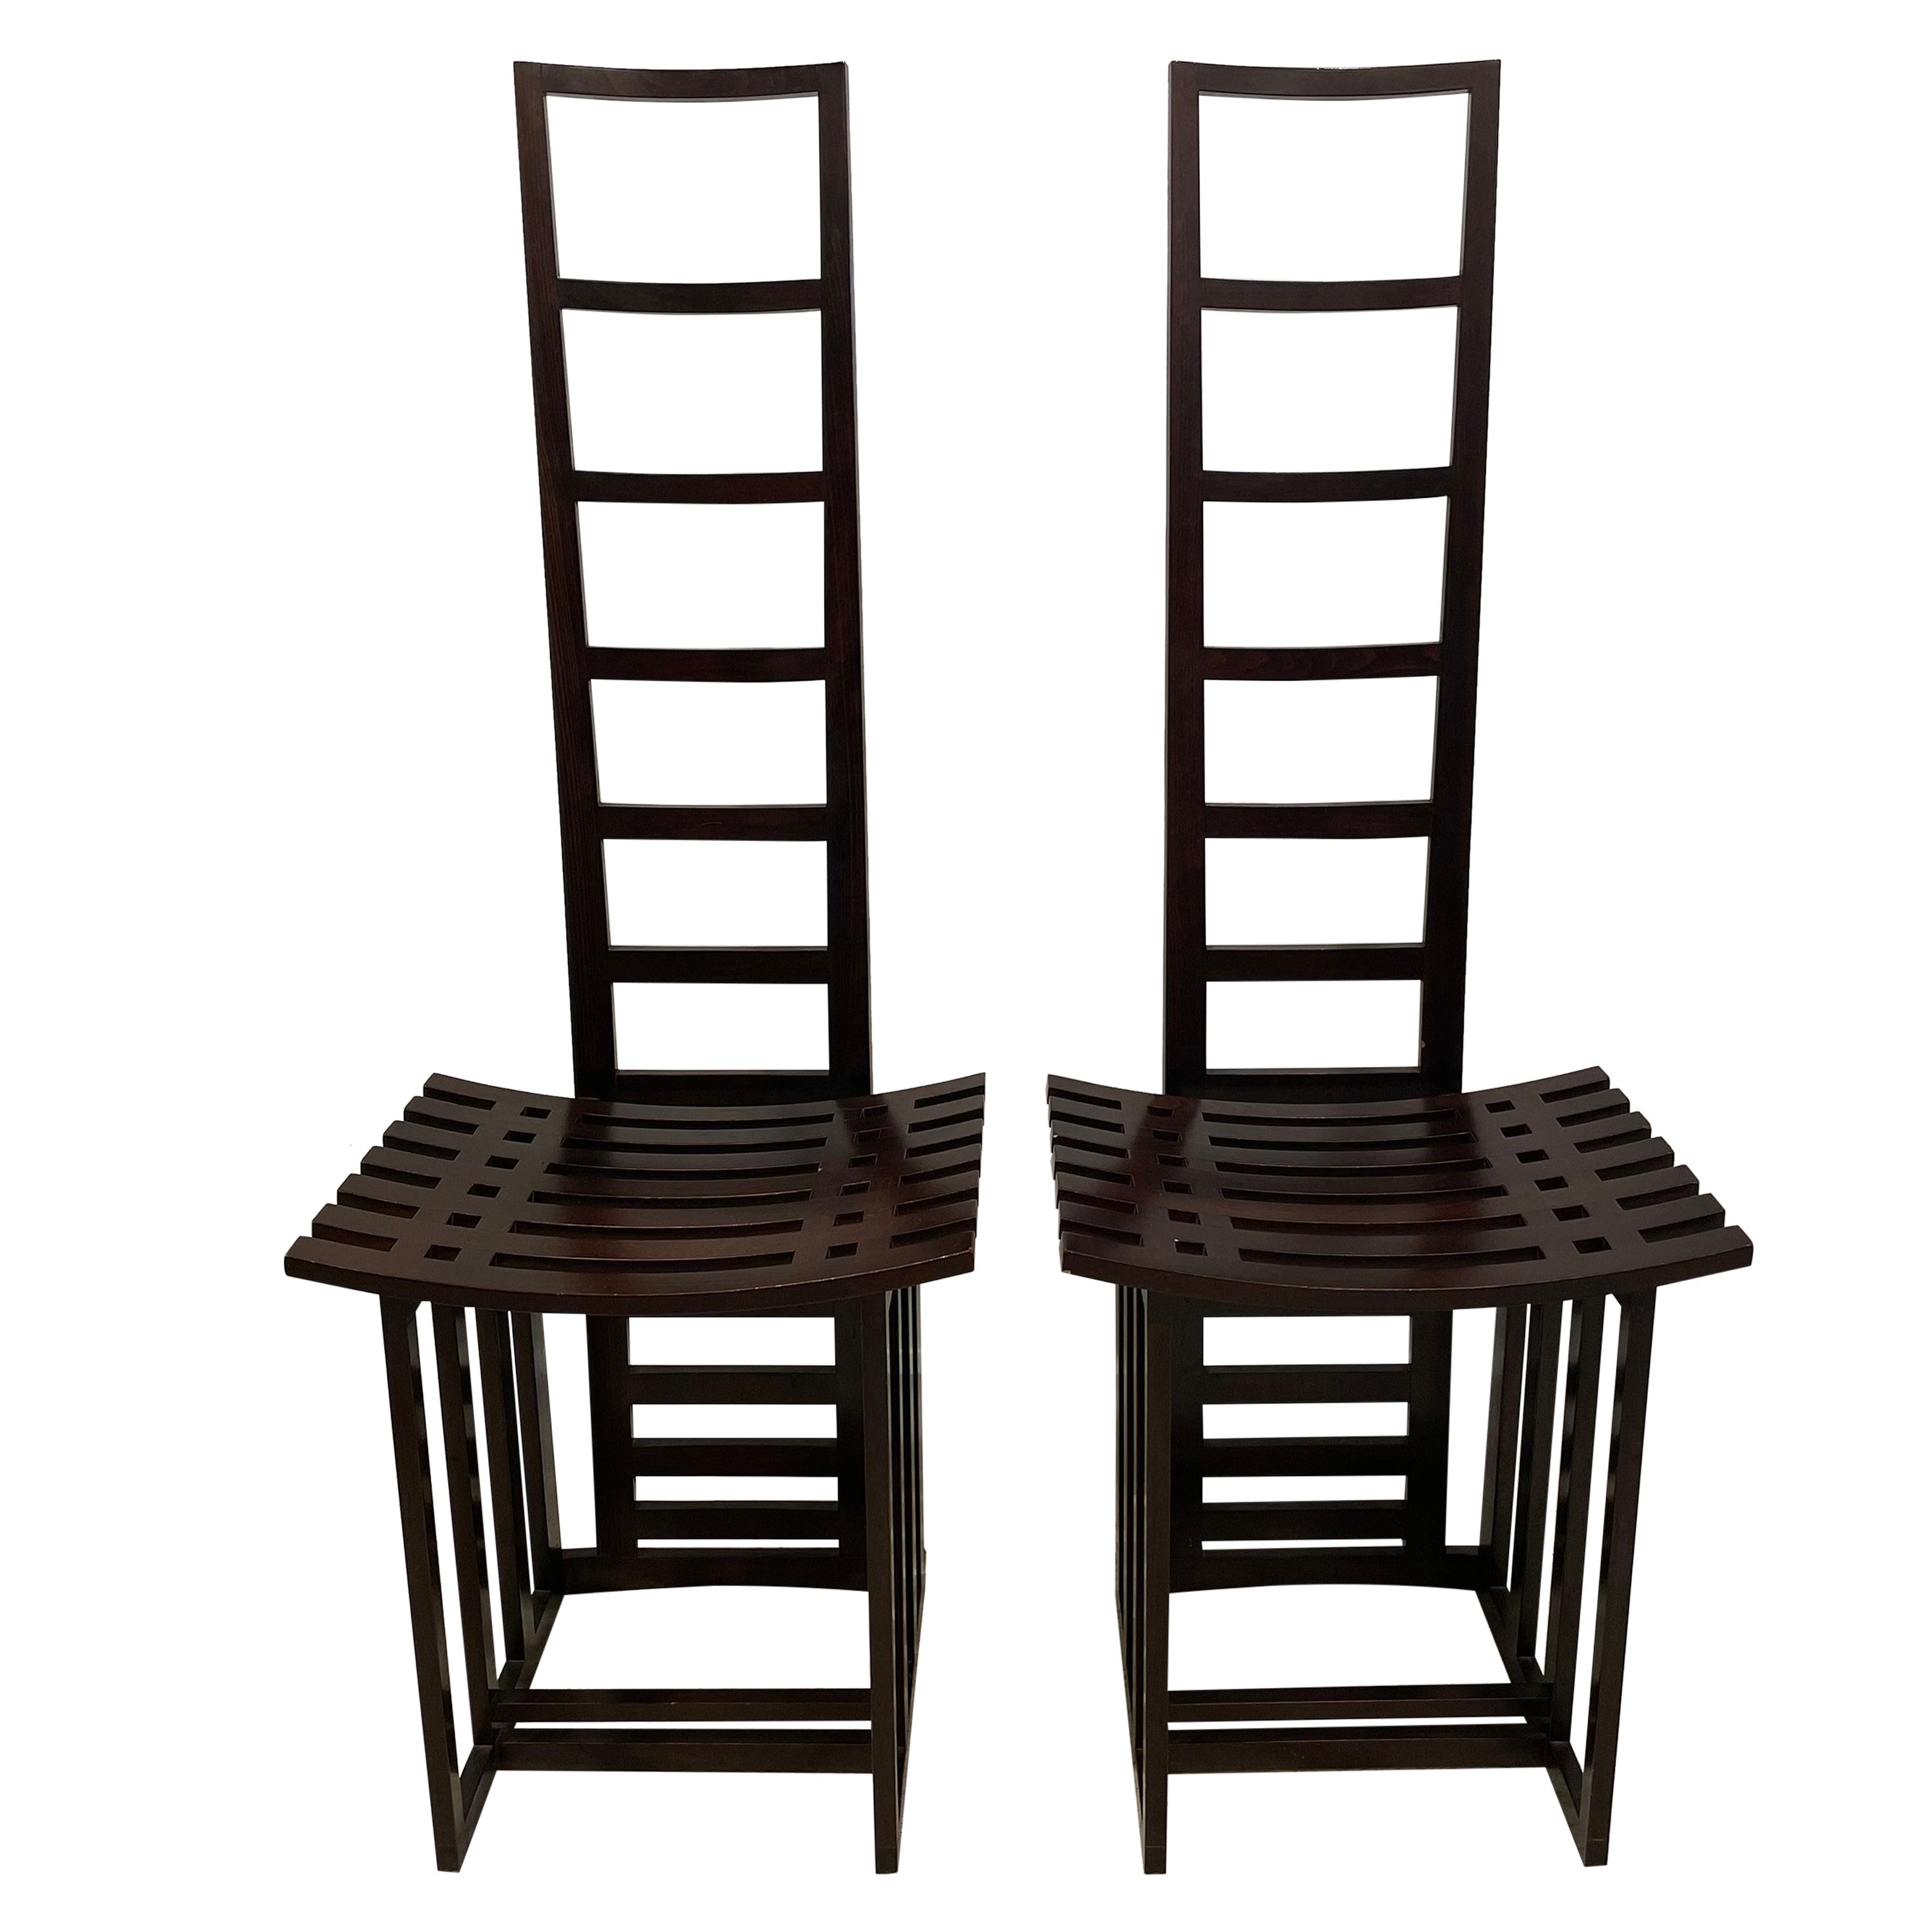 Tall Ladderback Architectural Design Chairs, Pair